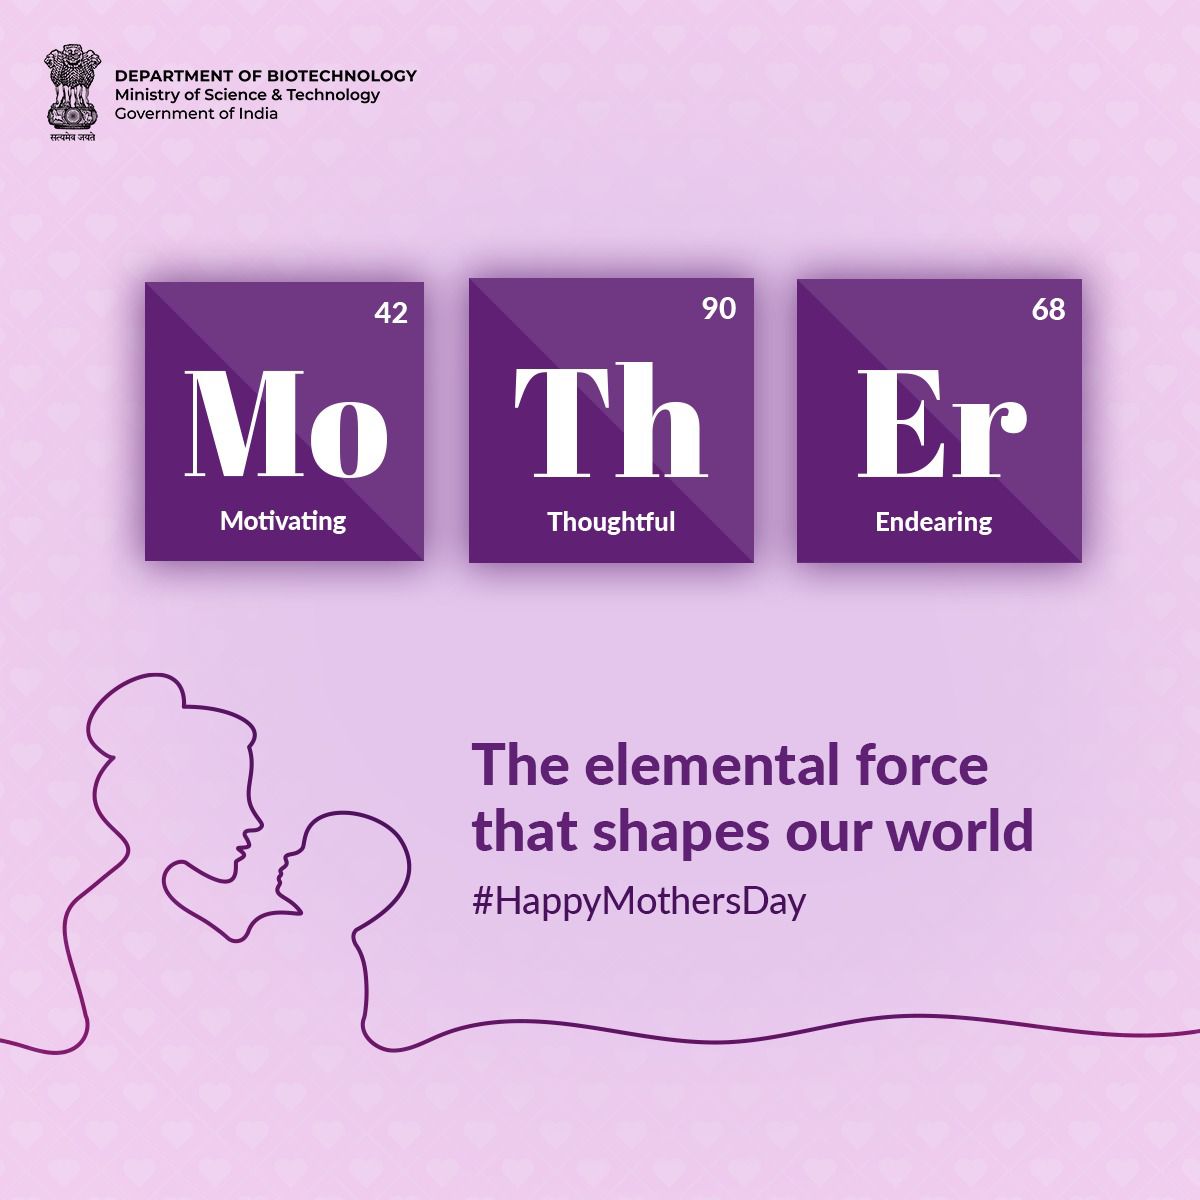 This Mother's Day, @DBTIndia celebrate the incredible journey of motherhood and the profound impact of maternal care in our lives. #HappyMothersDay @DrJitendraSingh @rajesh_gokhale